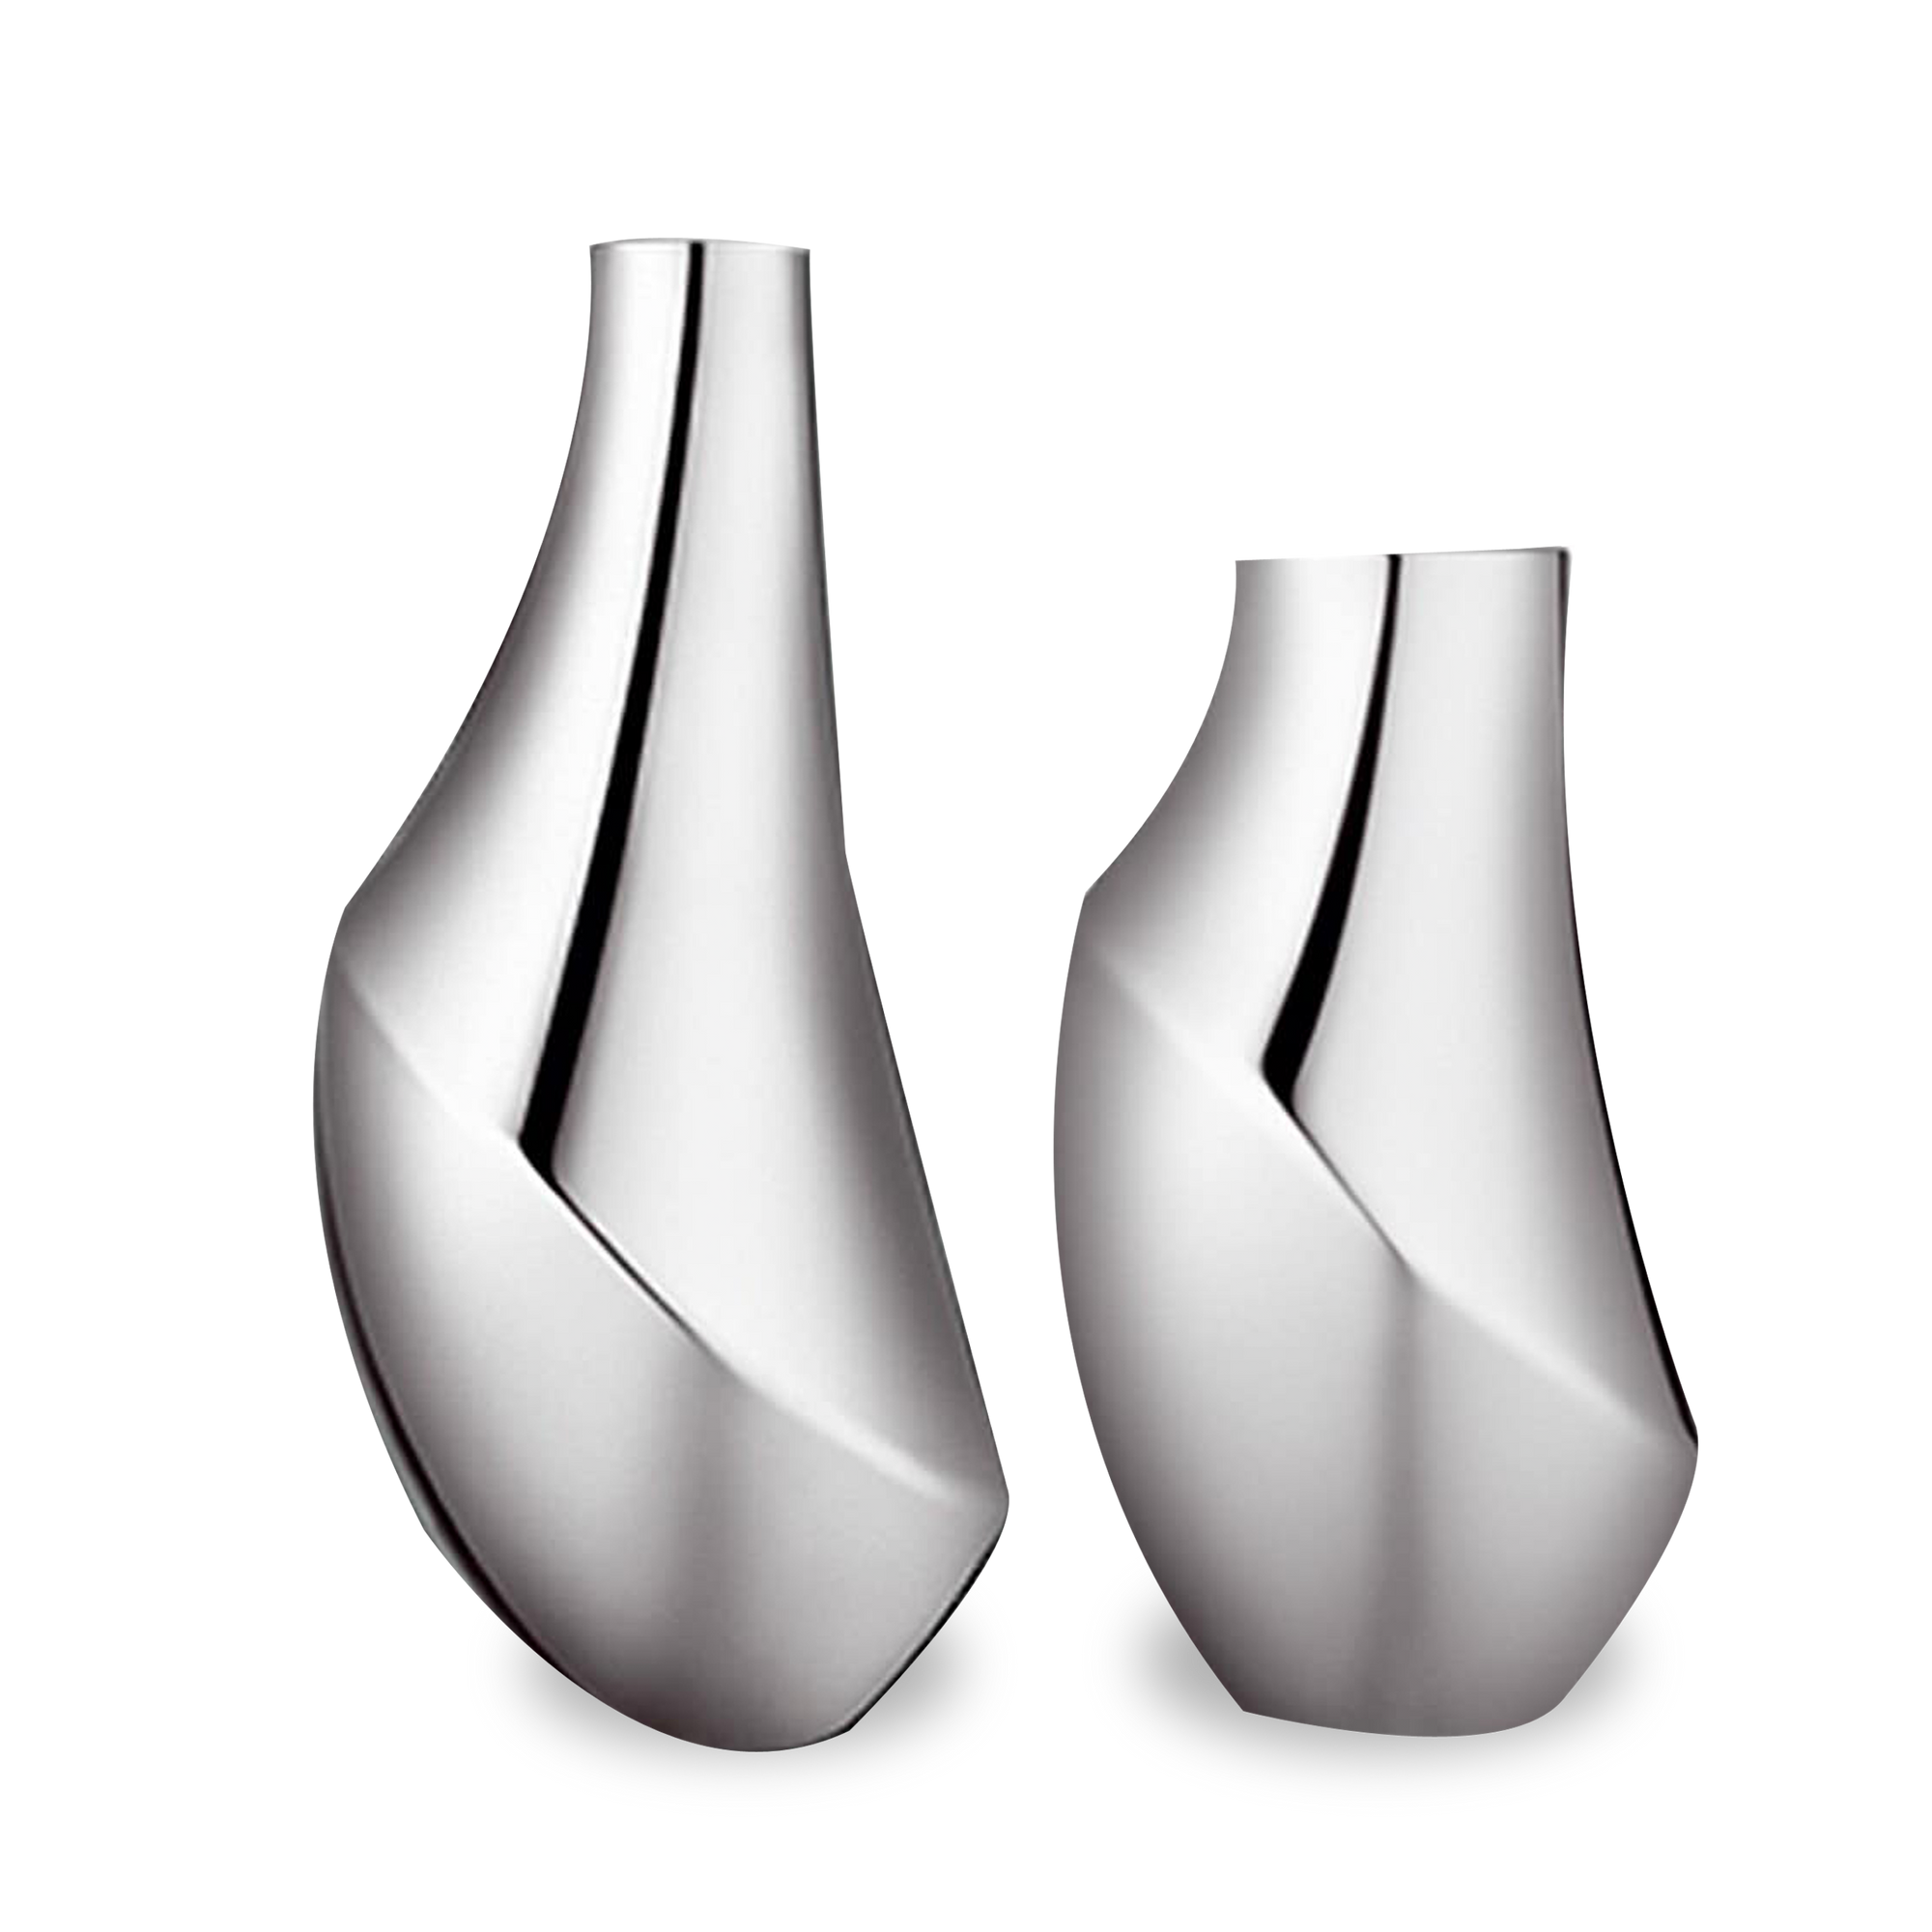 Almost a piece of sculpture in its own right, the unexpectedly asymmetrical shape of this eye-catching stainless steel vase makes it a beautiful centrepiece for a table.